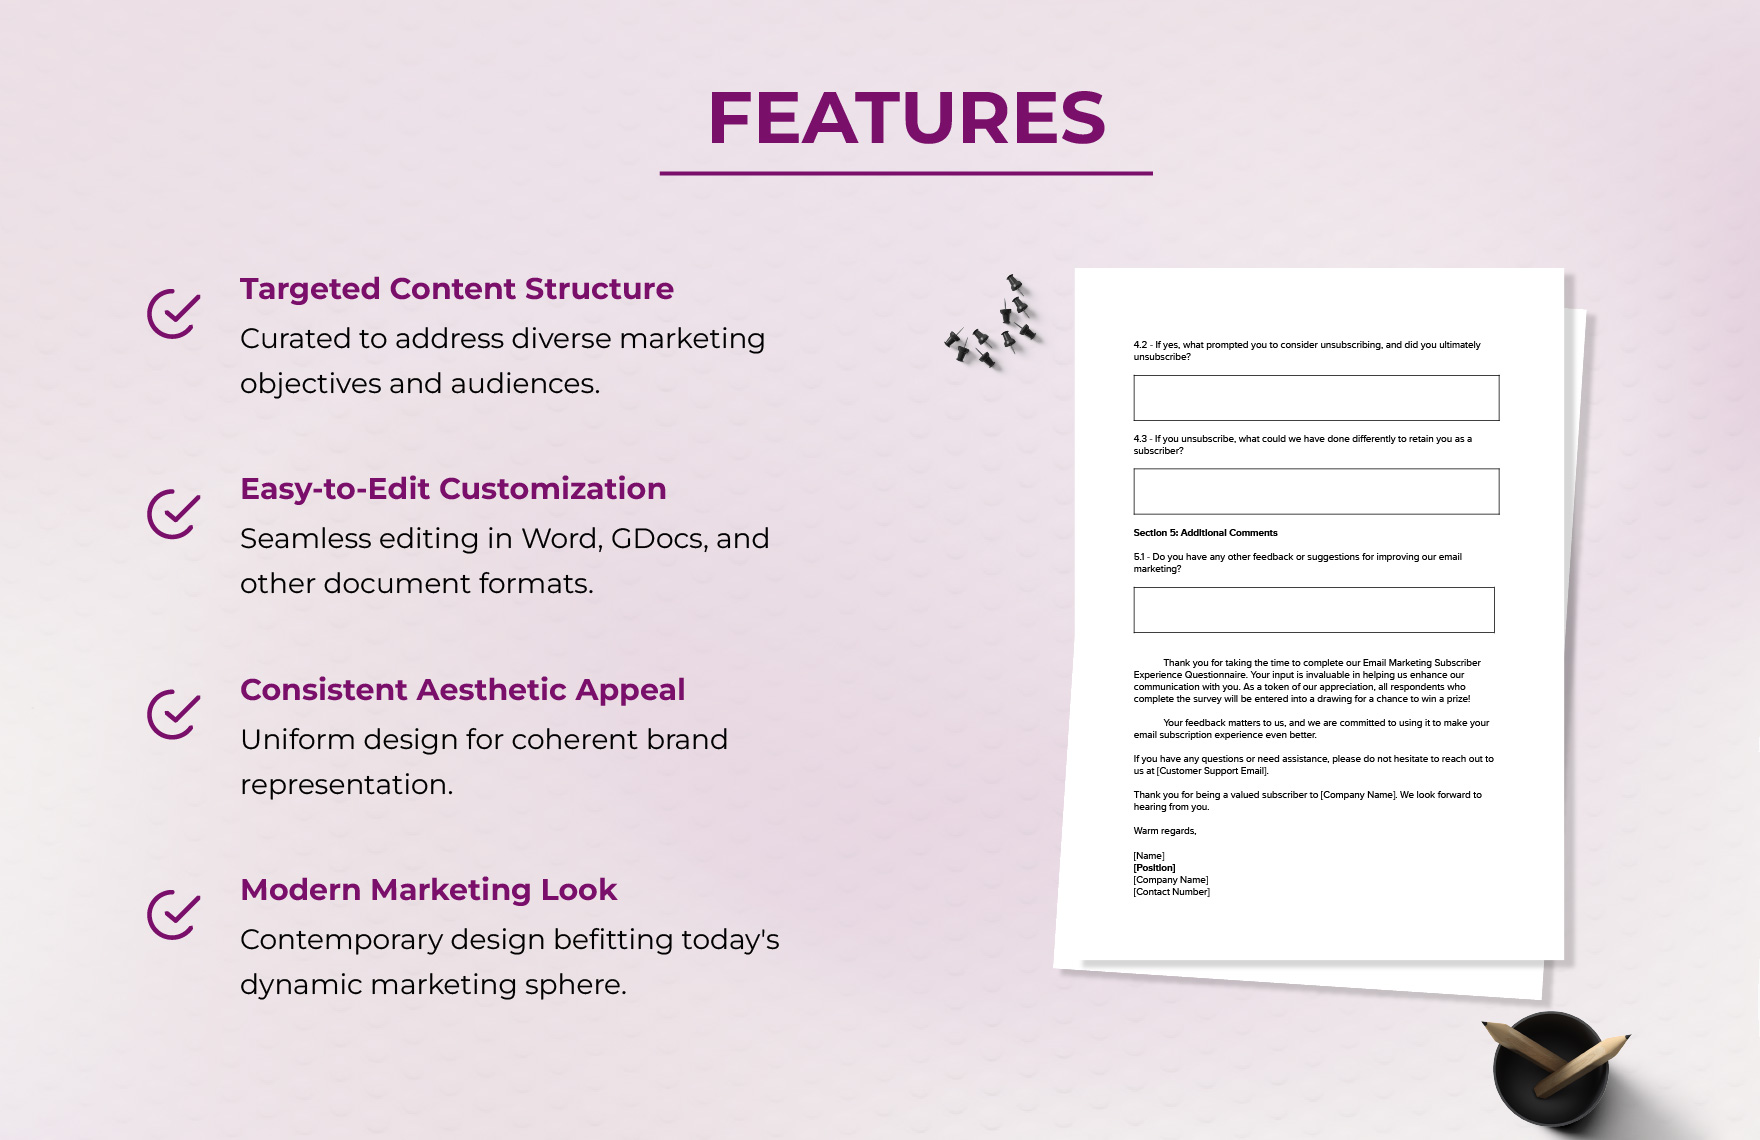 Email Marketing Subscriber Experience Questionnaire Template